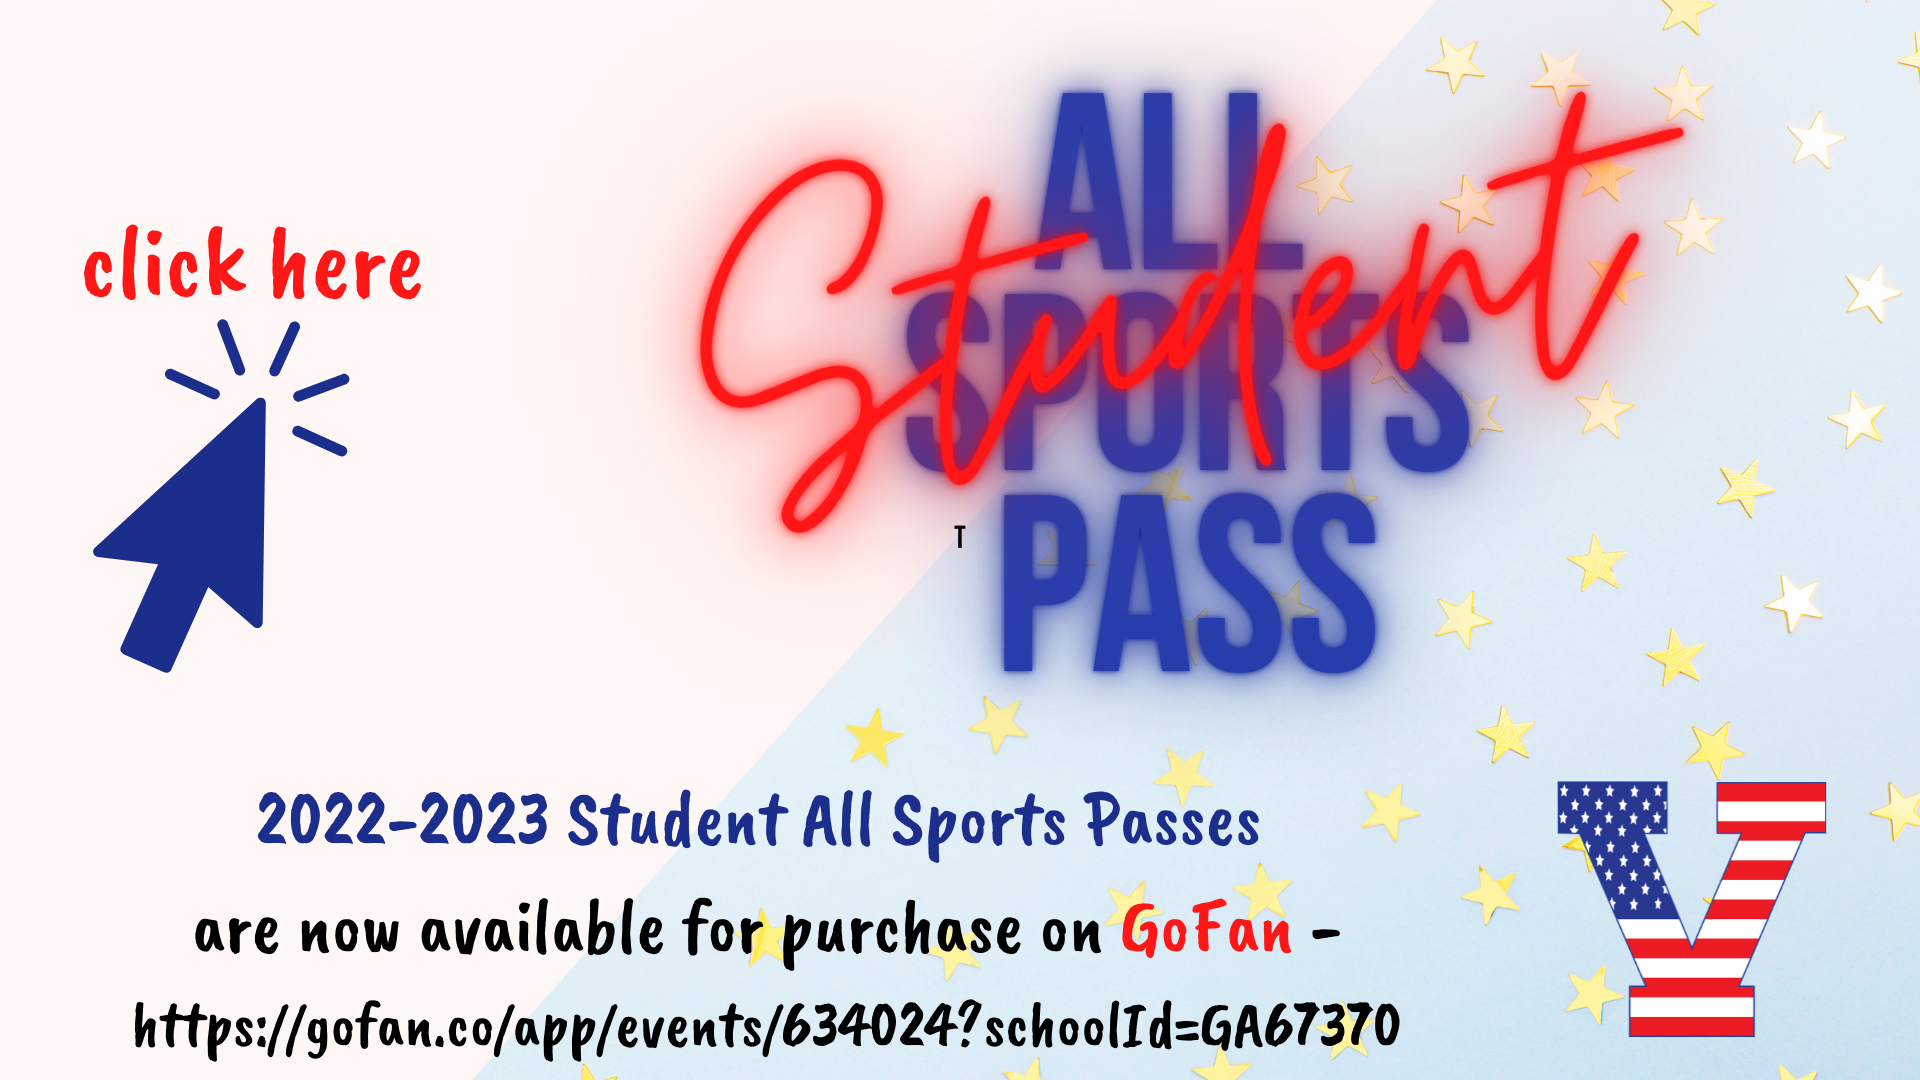 Student All Sports Pass 2022-2023